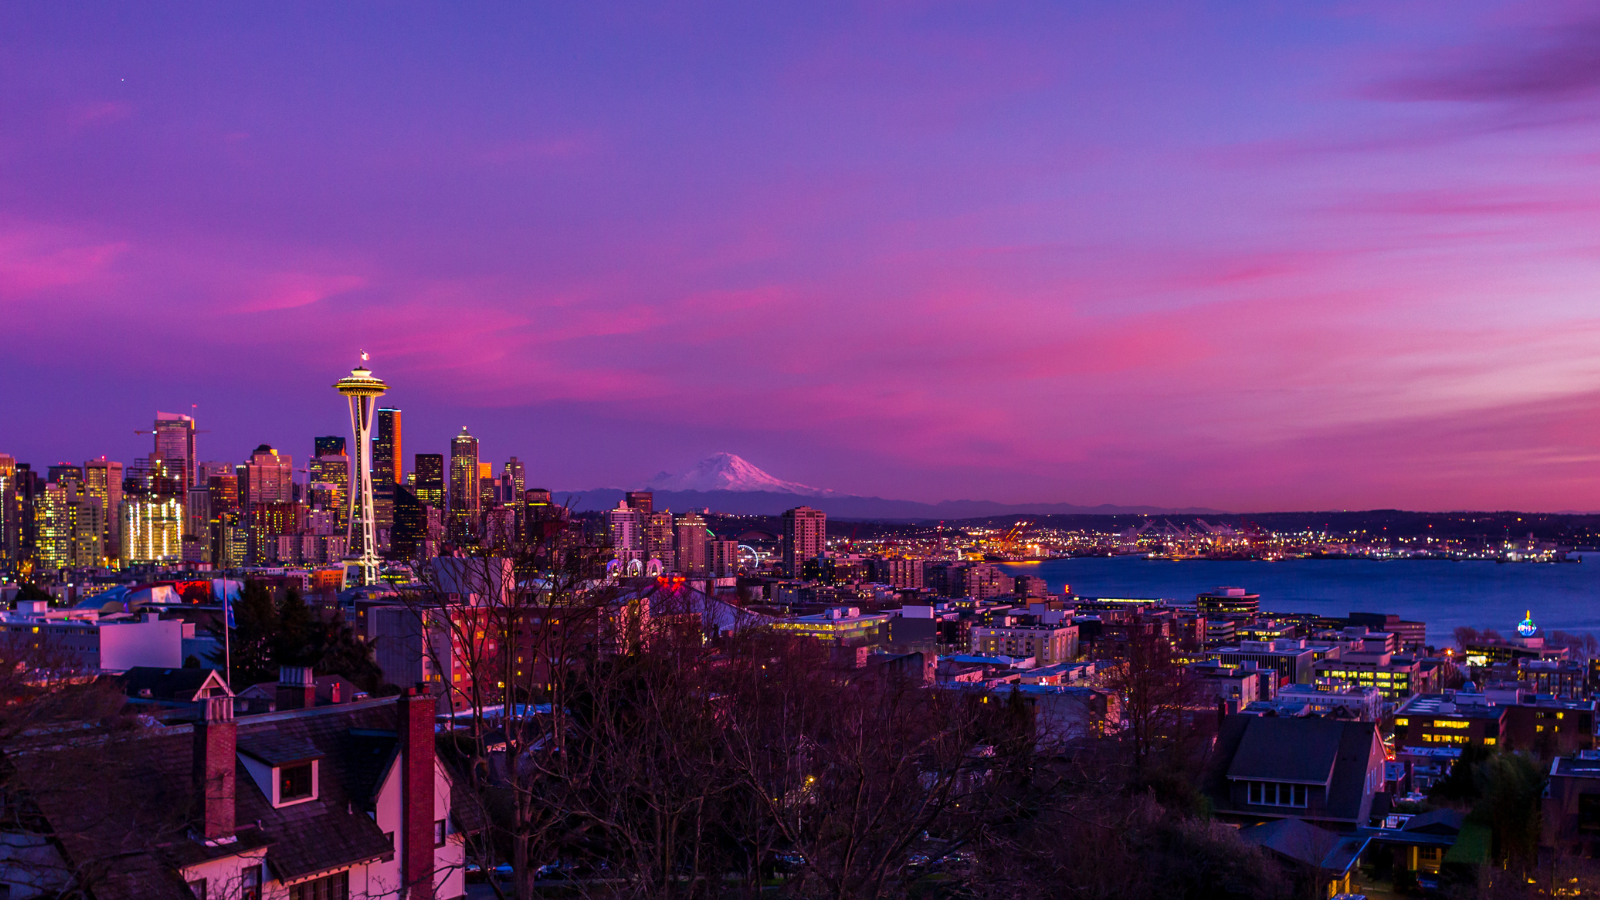 An evening photo of the Seattle skyline